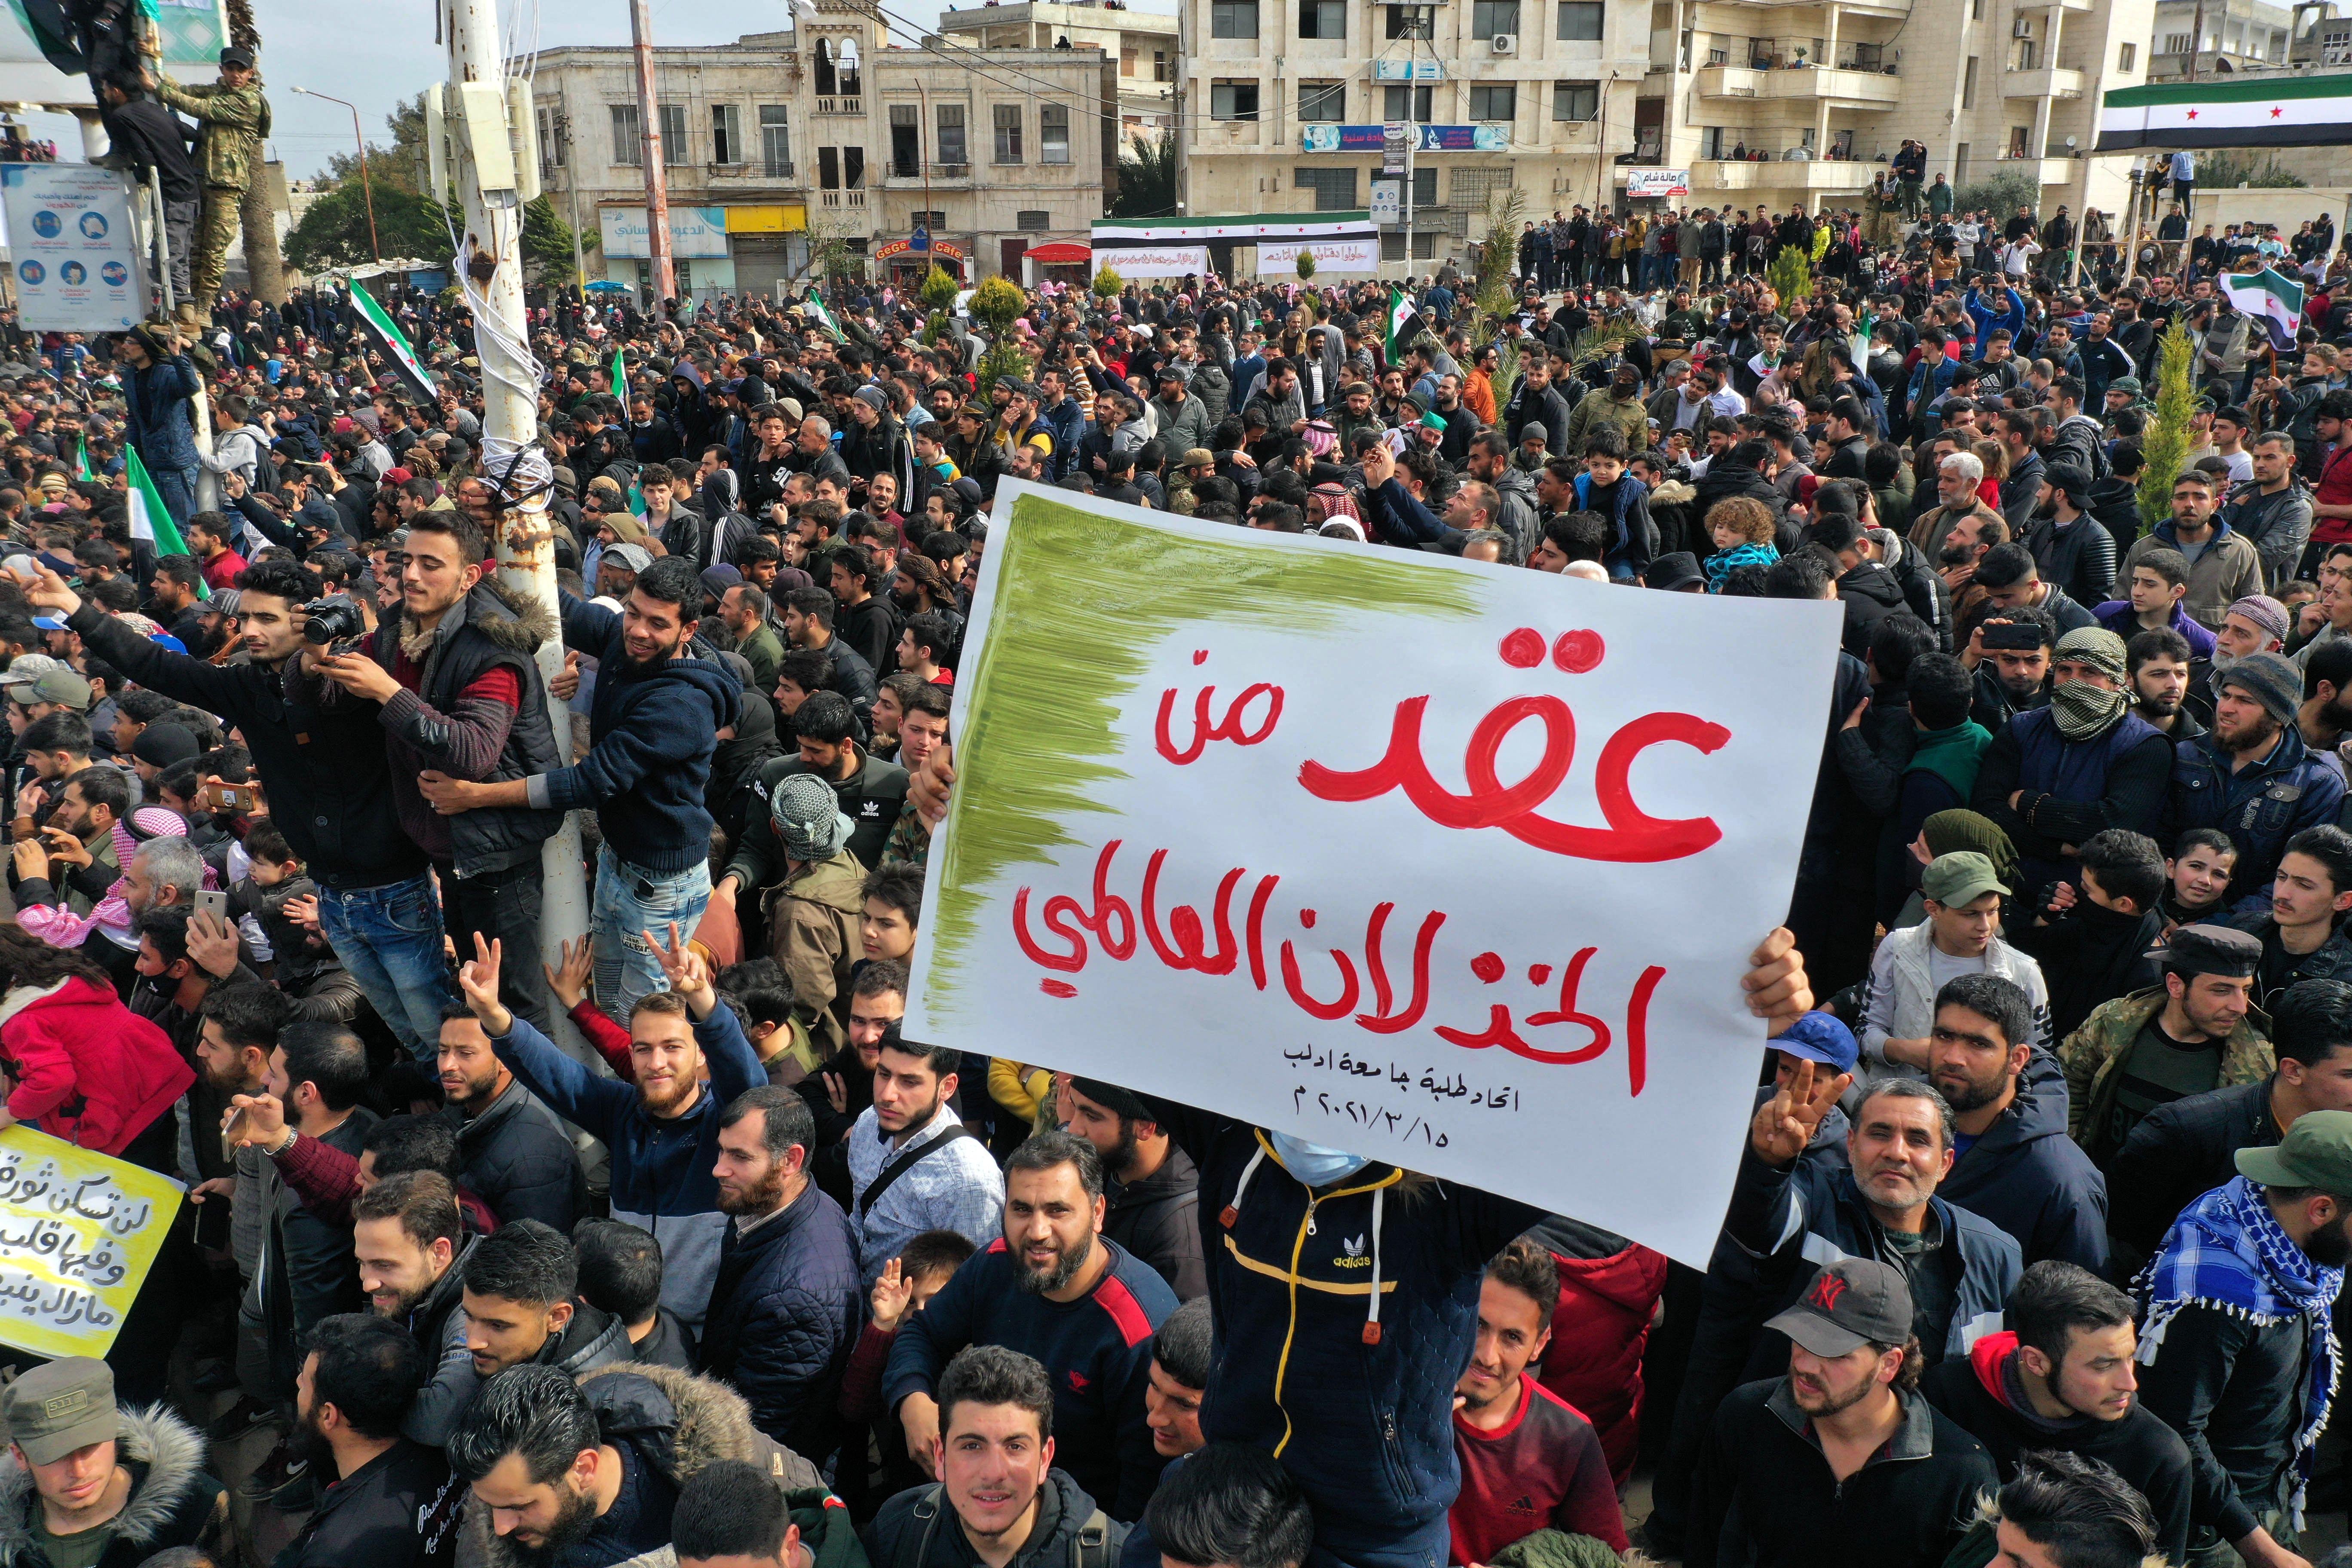 Syrians carrying a placard that reads "A decade of international letdown"